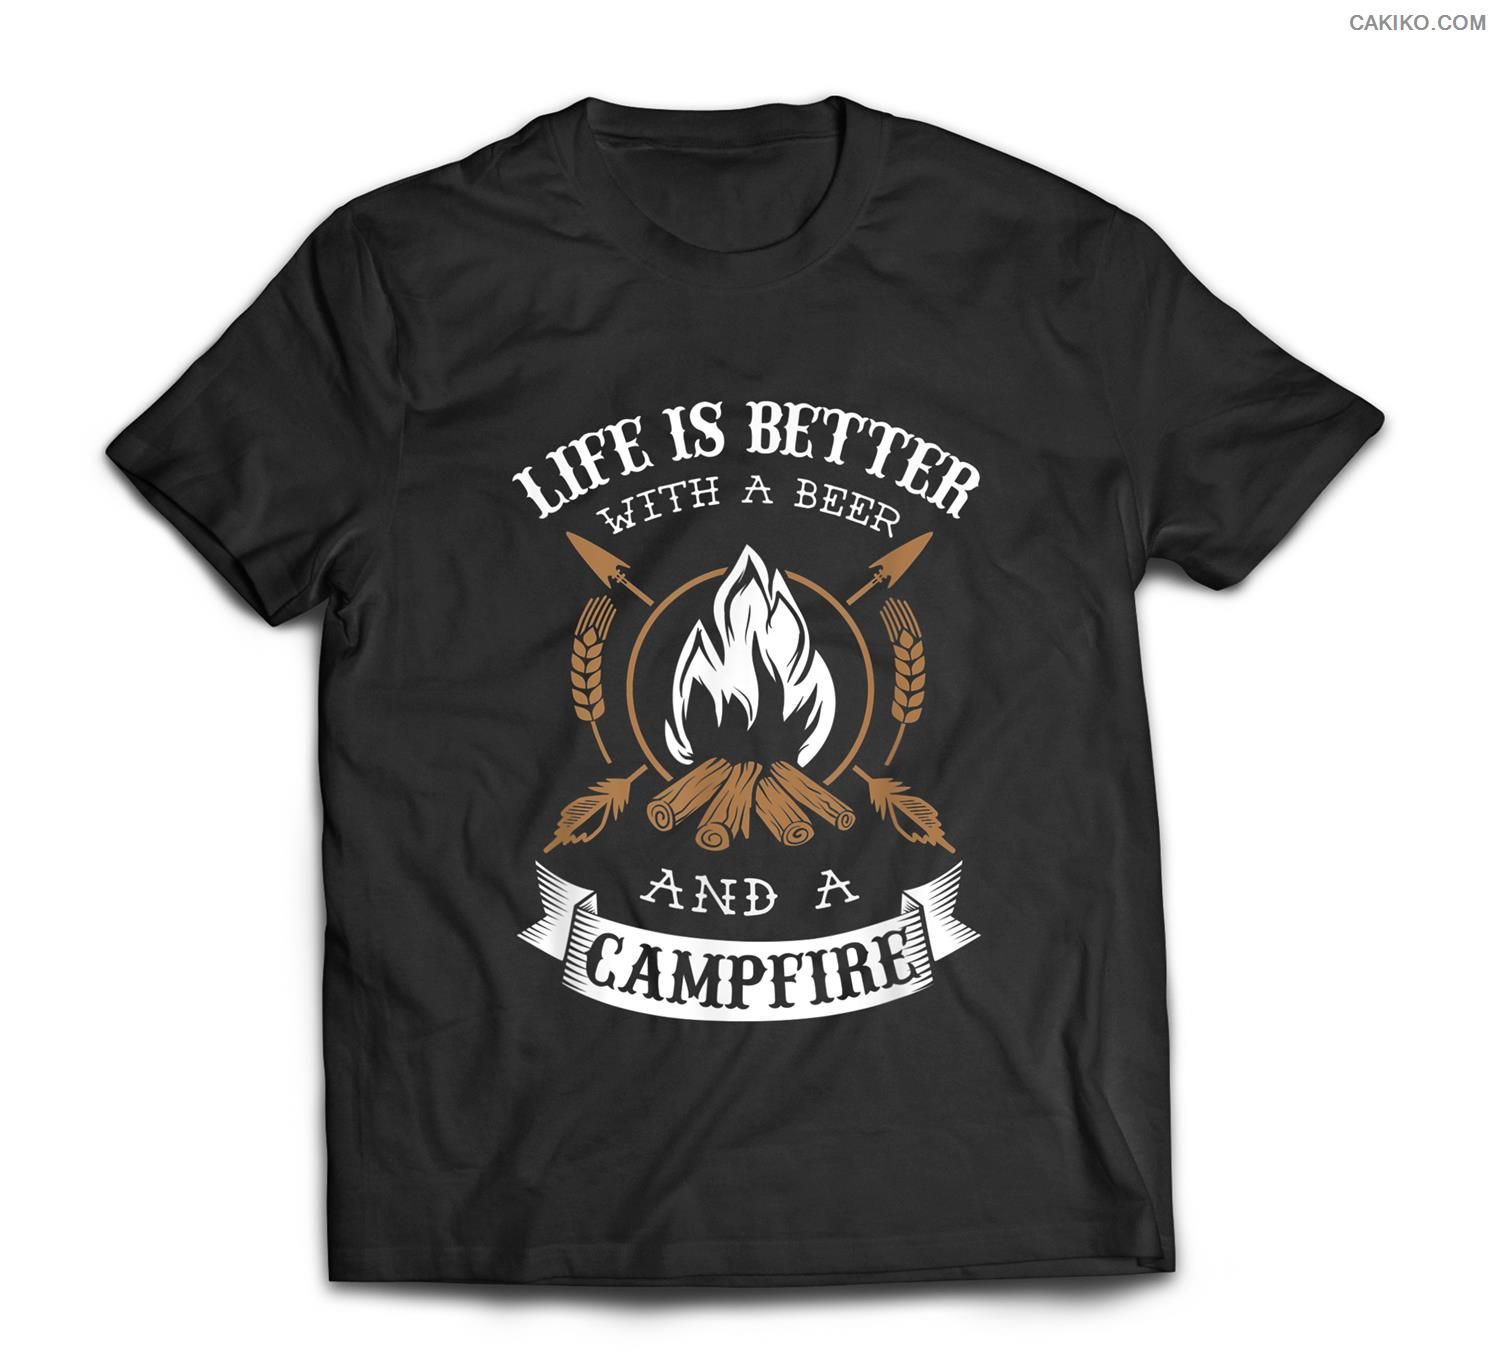 Life Is Better With A Beer And A Campfire – Camping T-Shirt